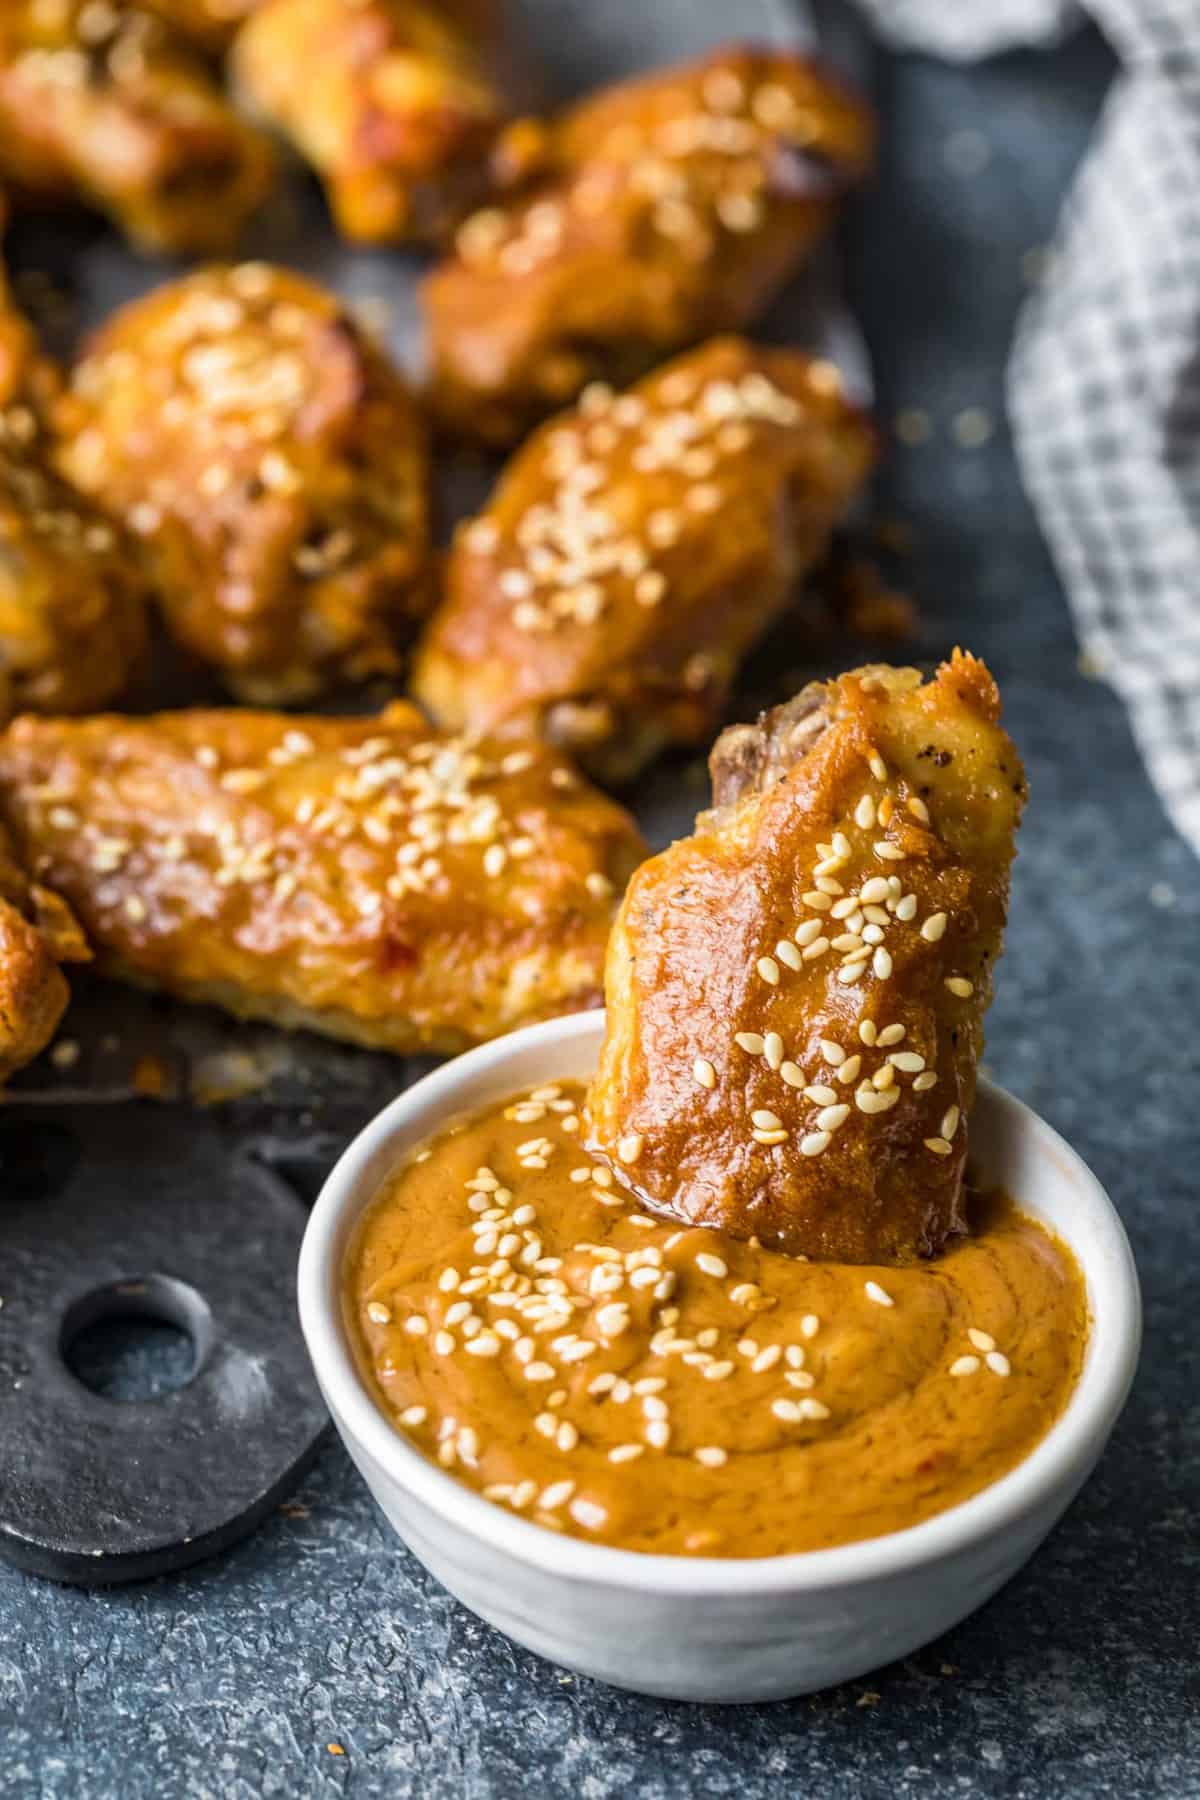 A Thai Chicken Wing dippe in peanut sauce